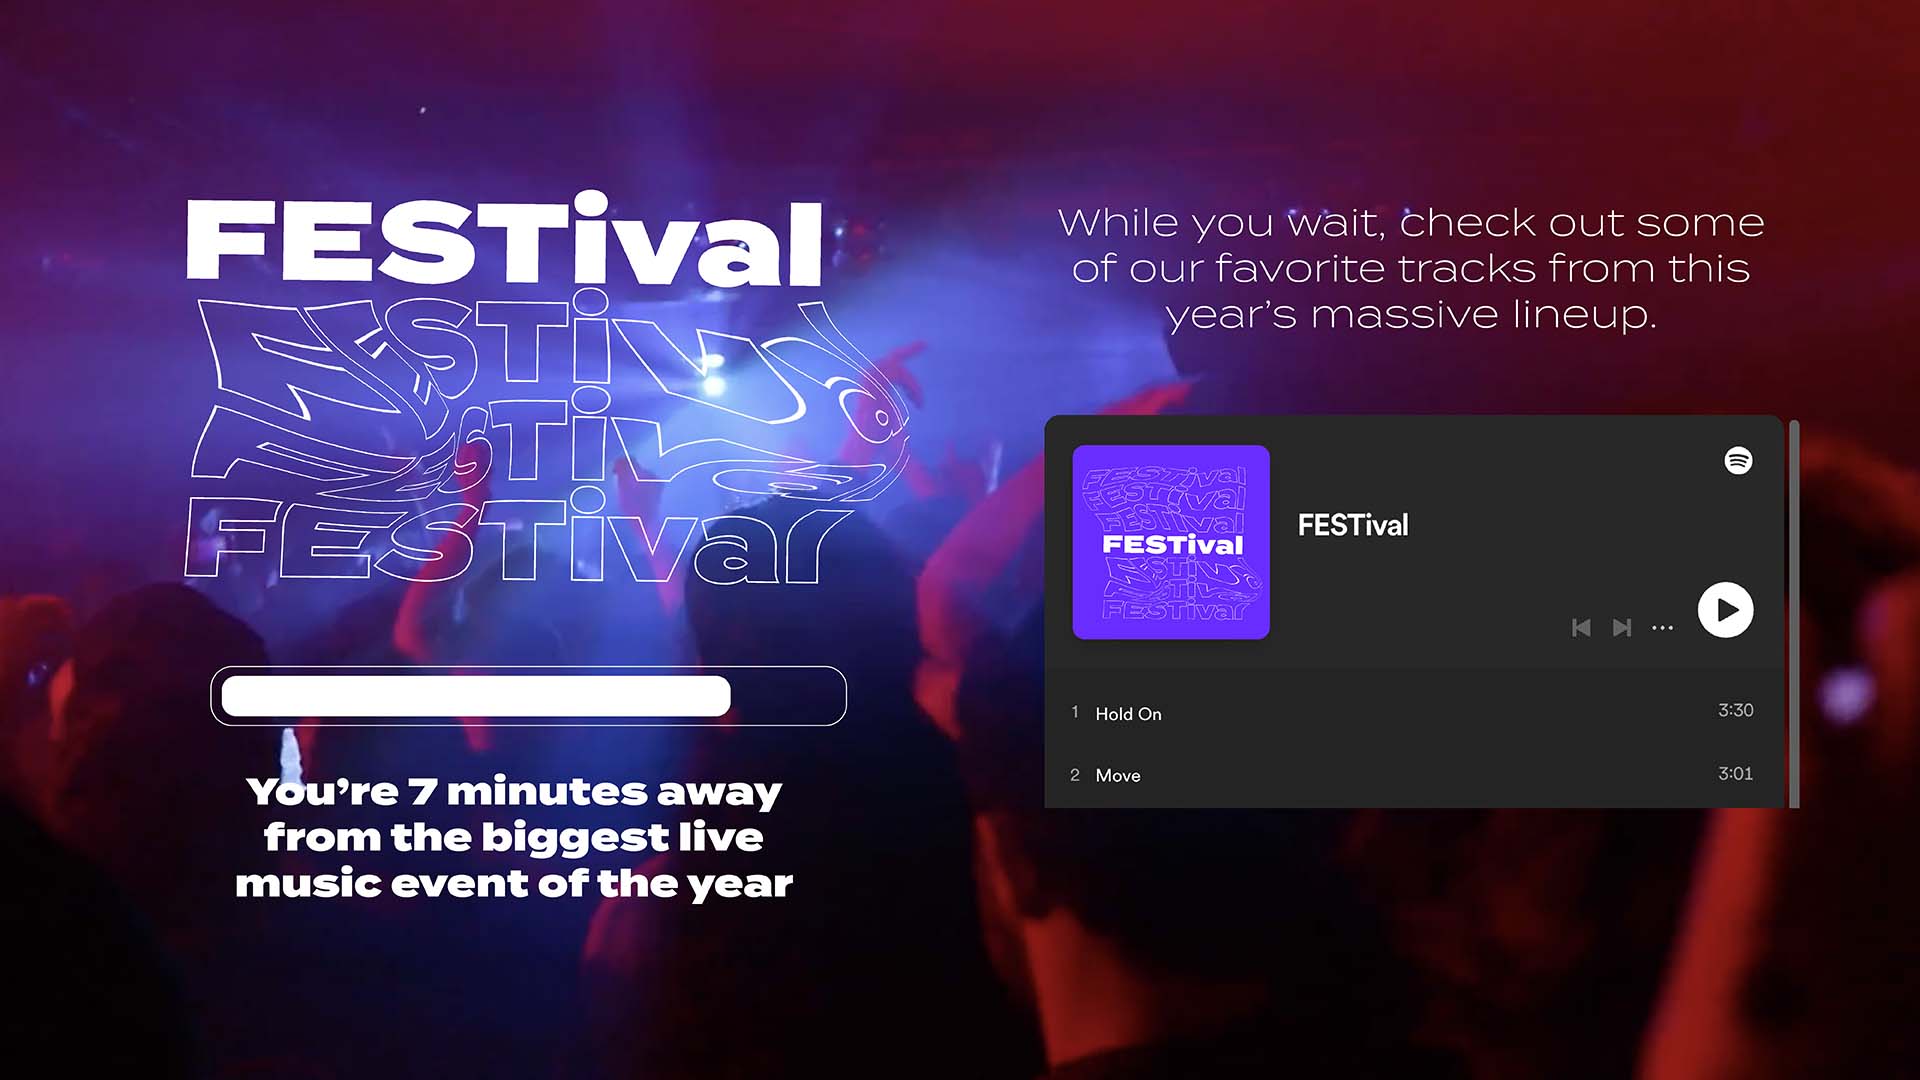 Waiting room page for festival with embedded content